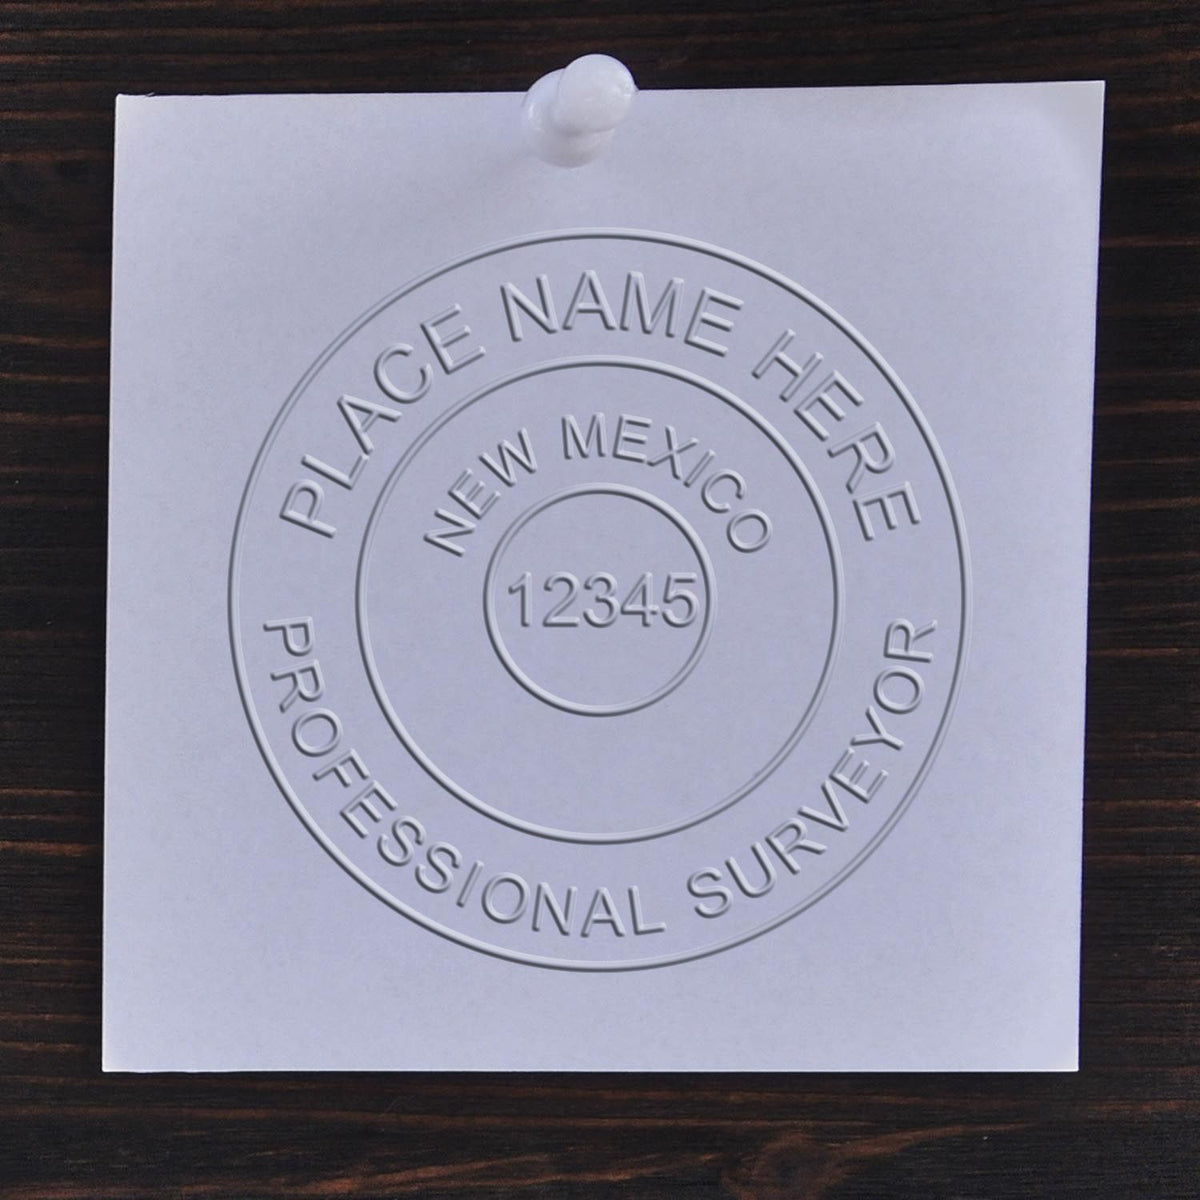 A photograph of the State of New Mexico Soft Land Surveyor Embossing Seal stamp impression reveals a vivid, professional image of the on paper.